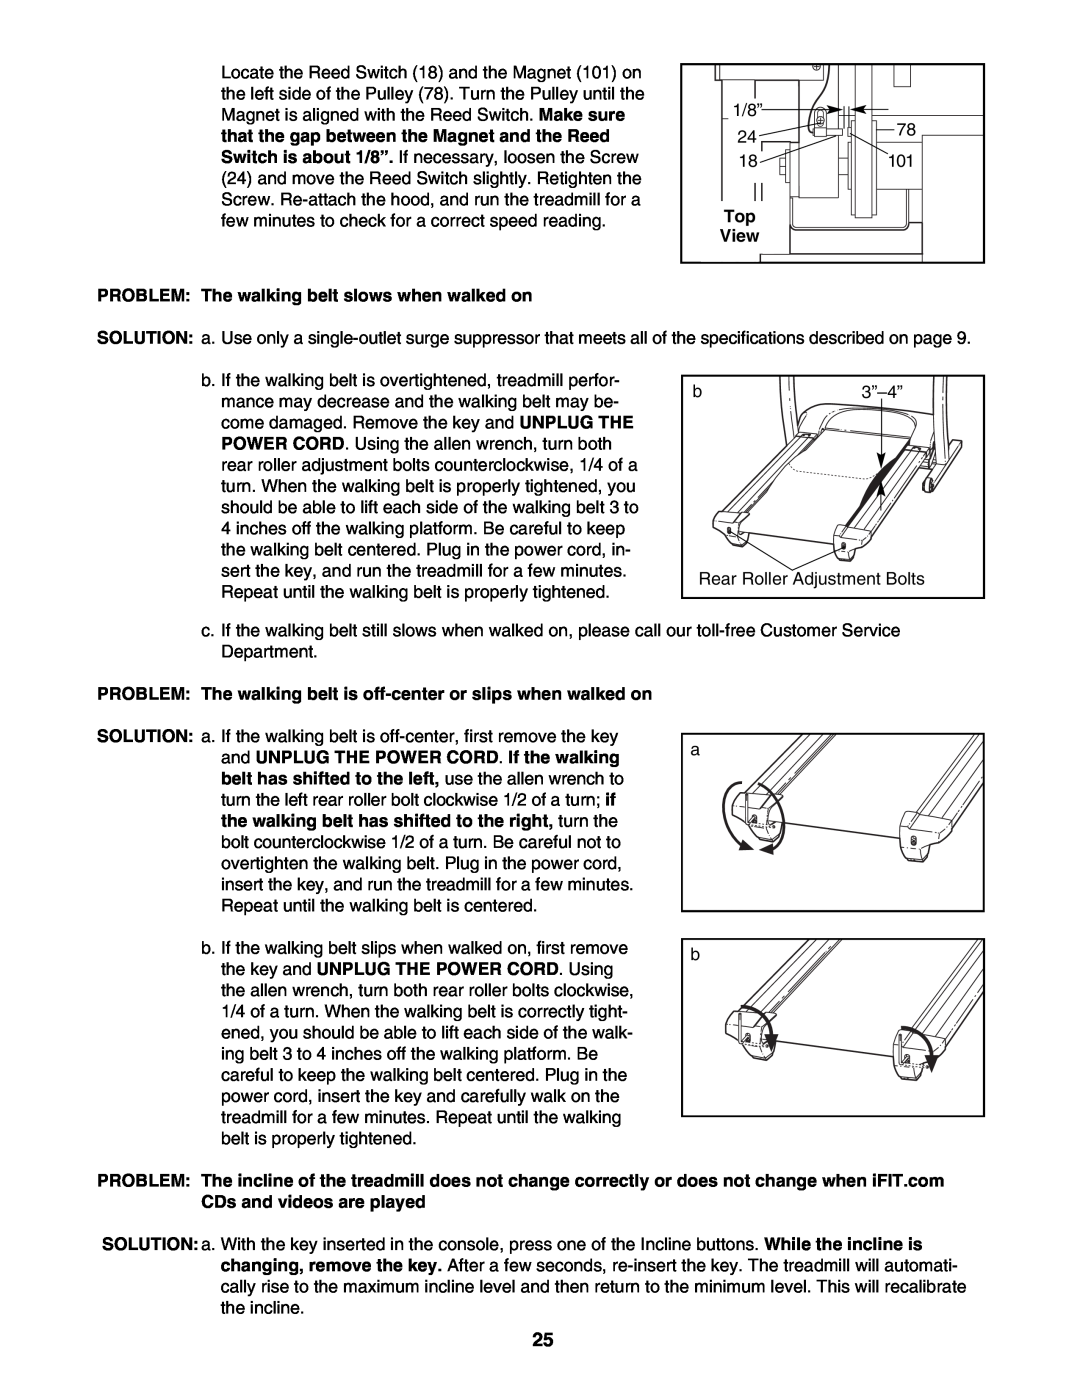 ProForm PFTL59023 user manual PROBLEM The walking belt slows when walked on, View 